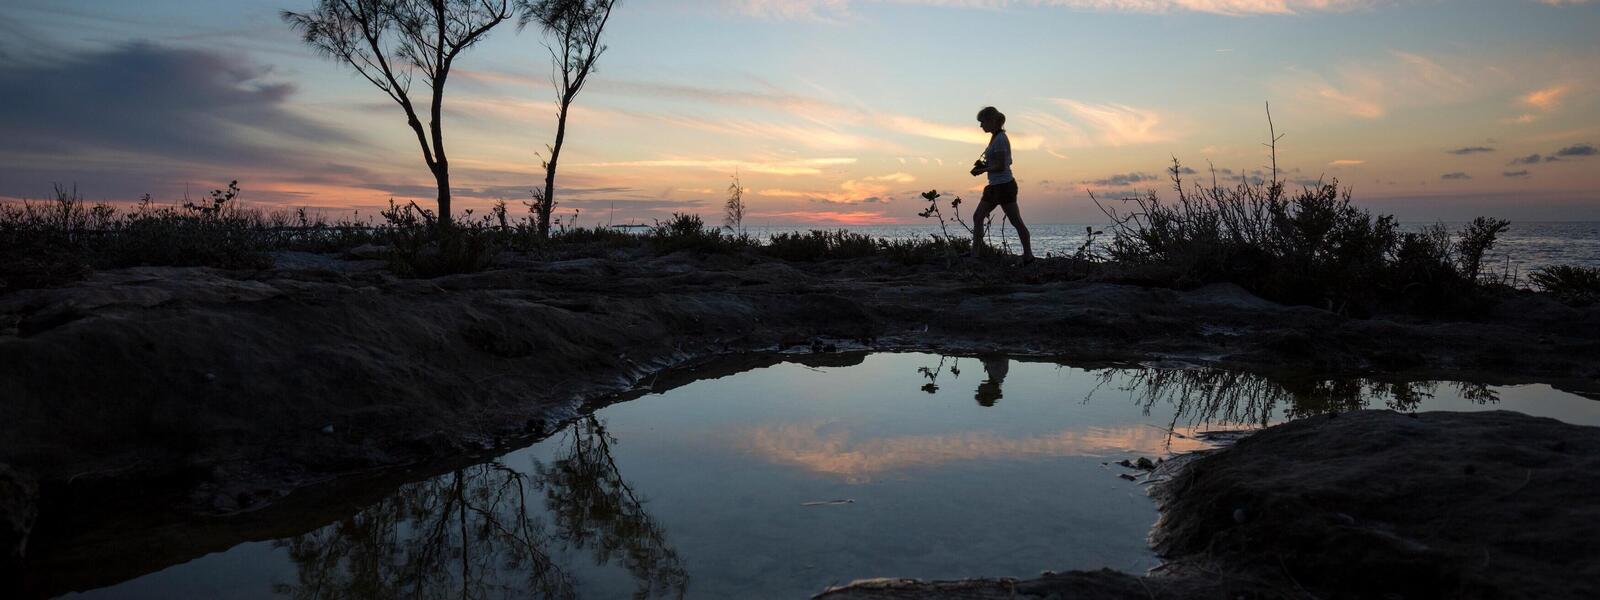 WWF staff person walks at dusk with tidepools in the foreground and ocean in the background